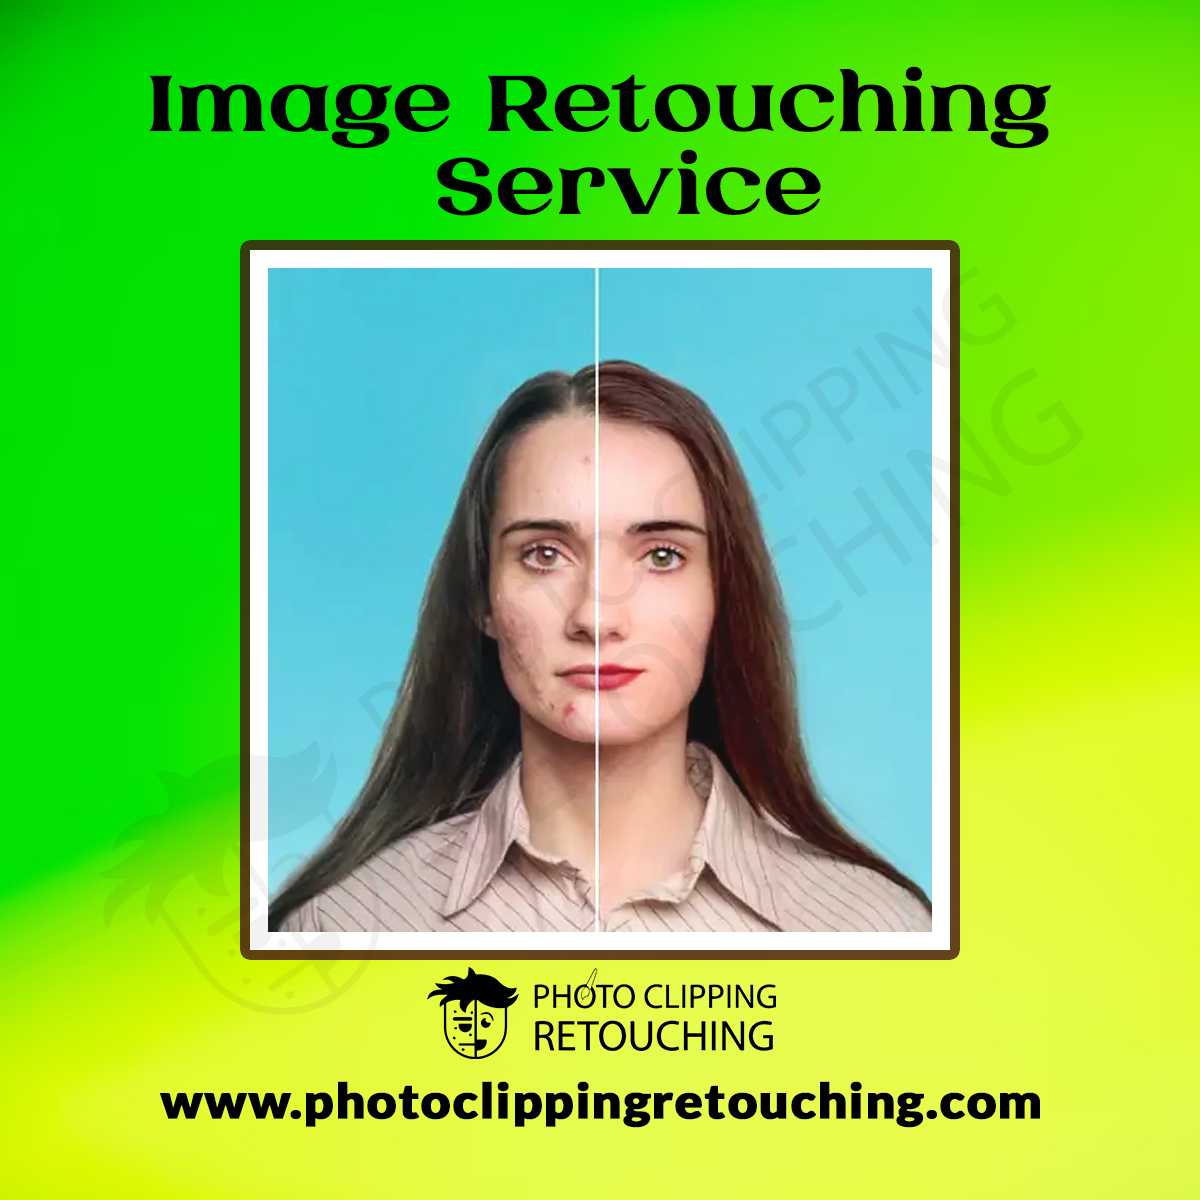 Stand out from the crowd with our expert retouching service! #ImageRetouching #RetouchingService #DigitalRetouching #FlawlessPhotos #BeforeAndAfter #PhotoEditing #EditingServices #GraphicDesign #teamPCR Email: info@photoclippingretouching.com Link: photoclippingretouching.com/photography-ch…